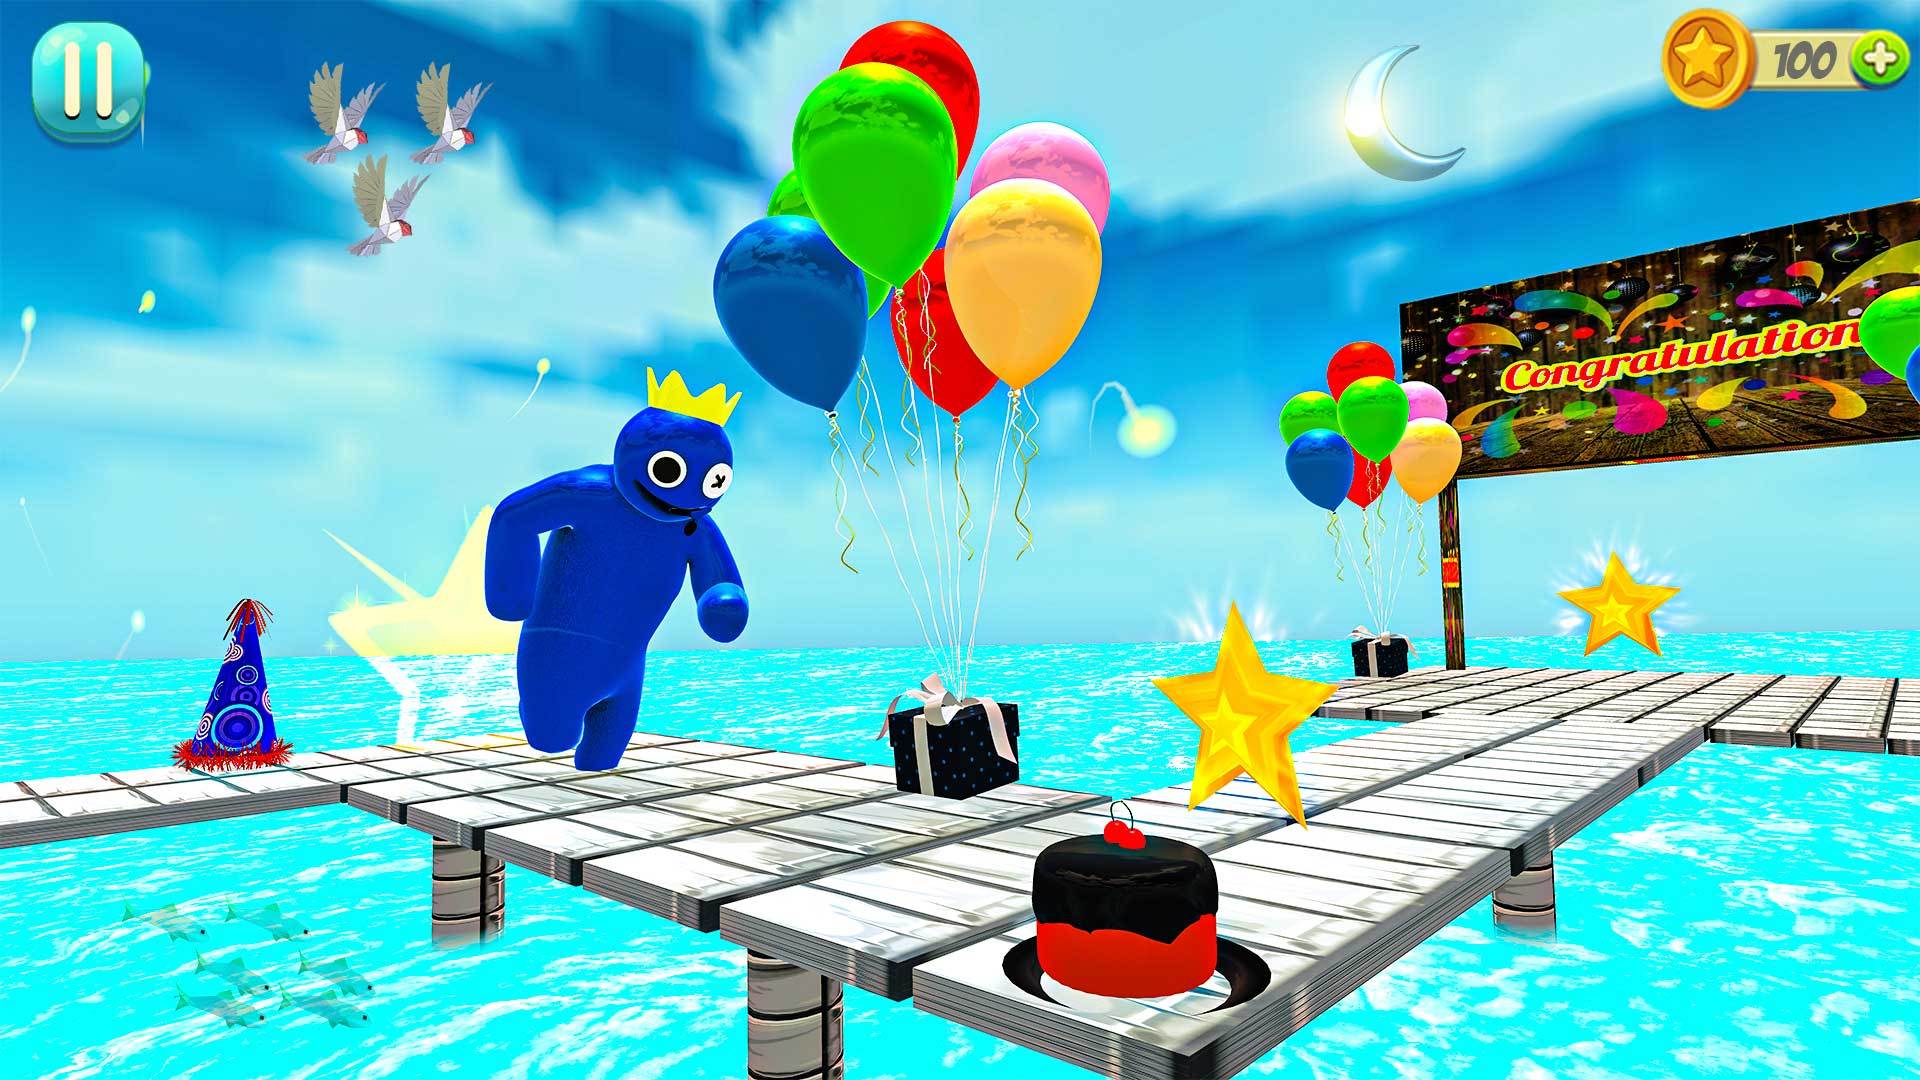 Rainbow Friends 2 Game APK para Android - Download